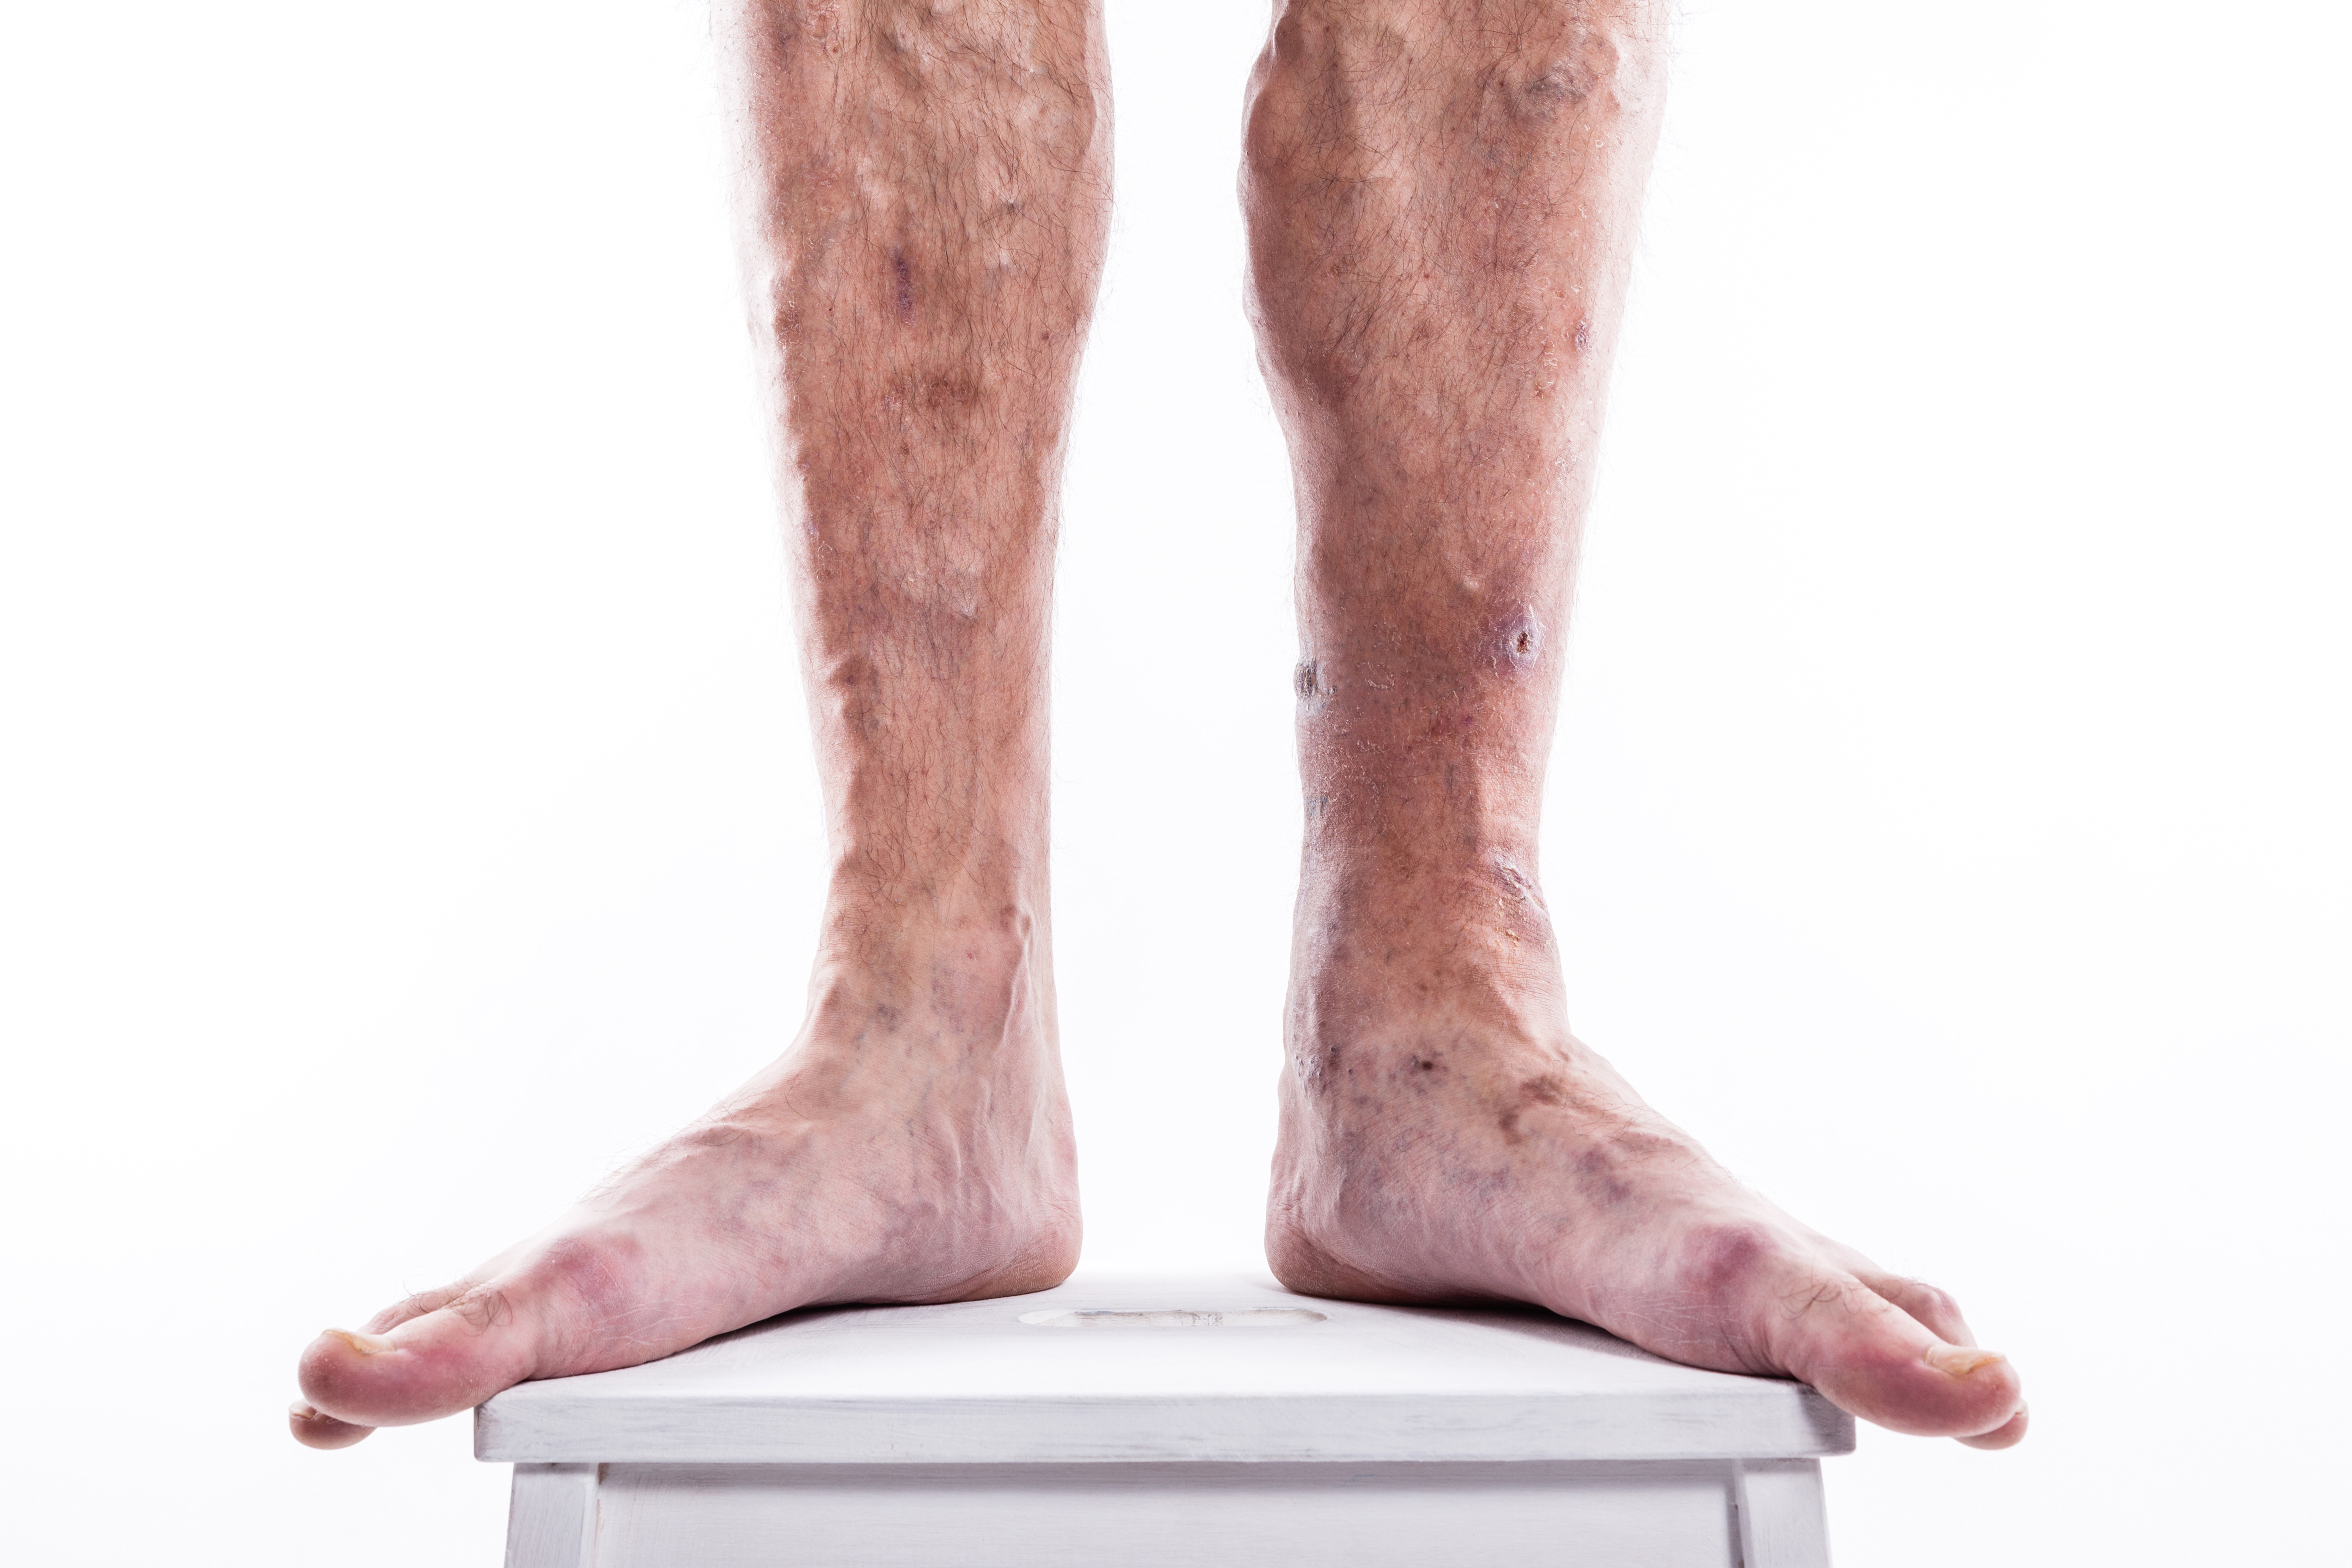 How Can I Treat My Varicose Veins?